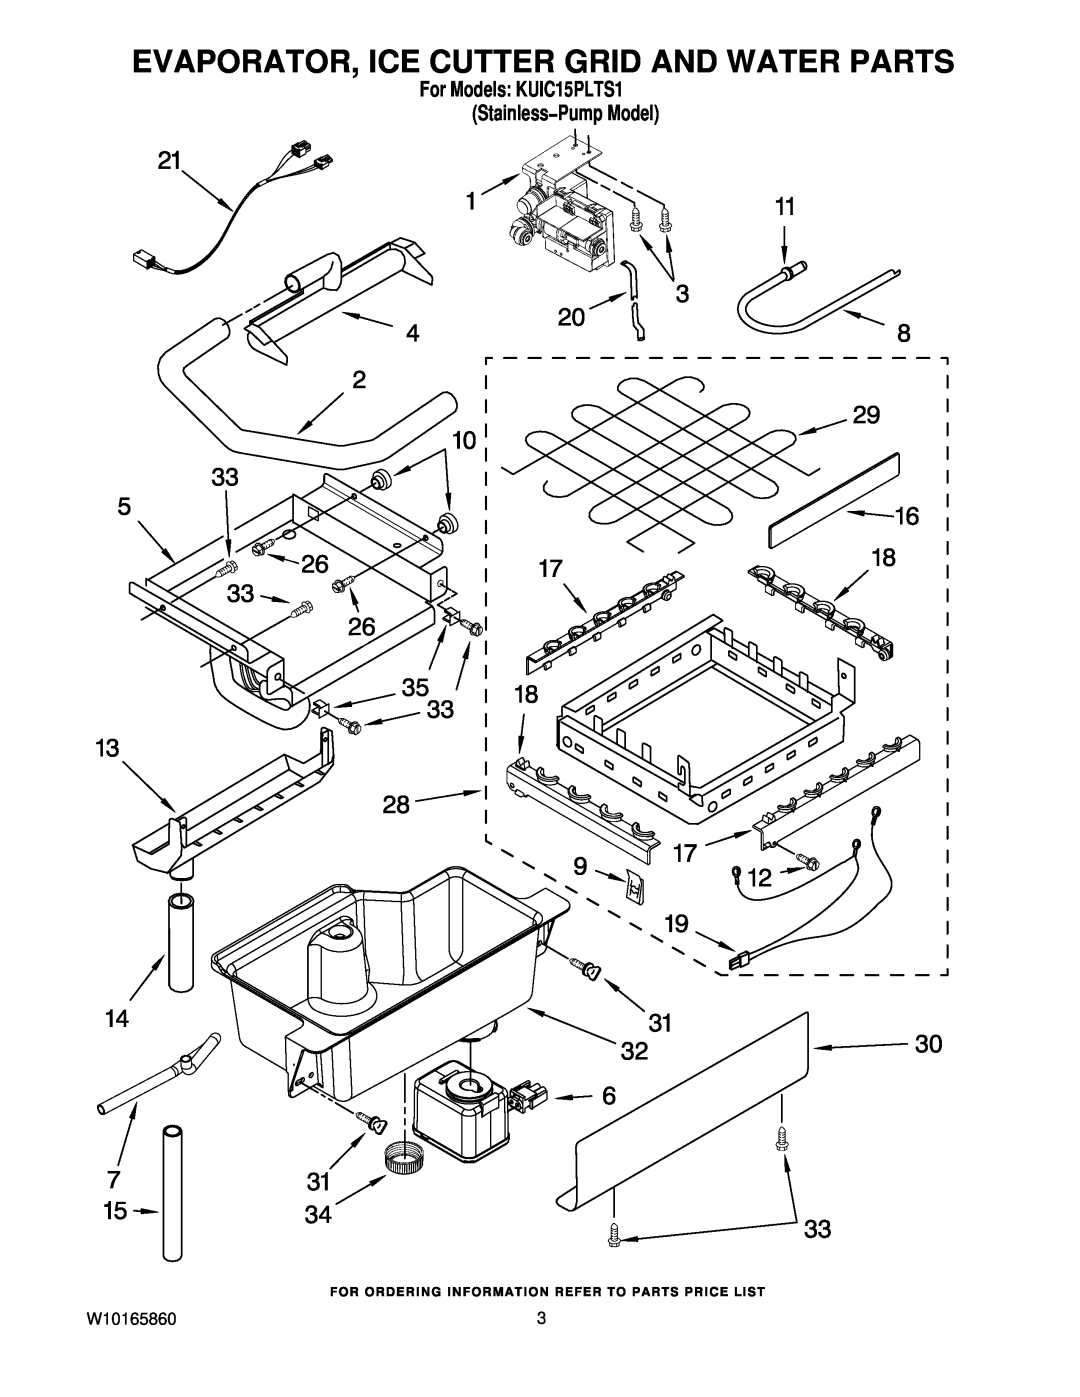 KitchenAid manual Evaporator, Ice Cutter Grid And Water Parts, W10165860, For Models KUIC15PLTS1 Stainless−Pump Model 